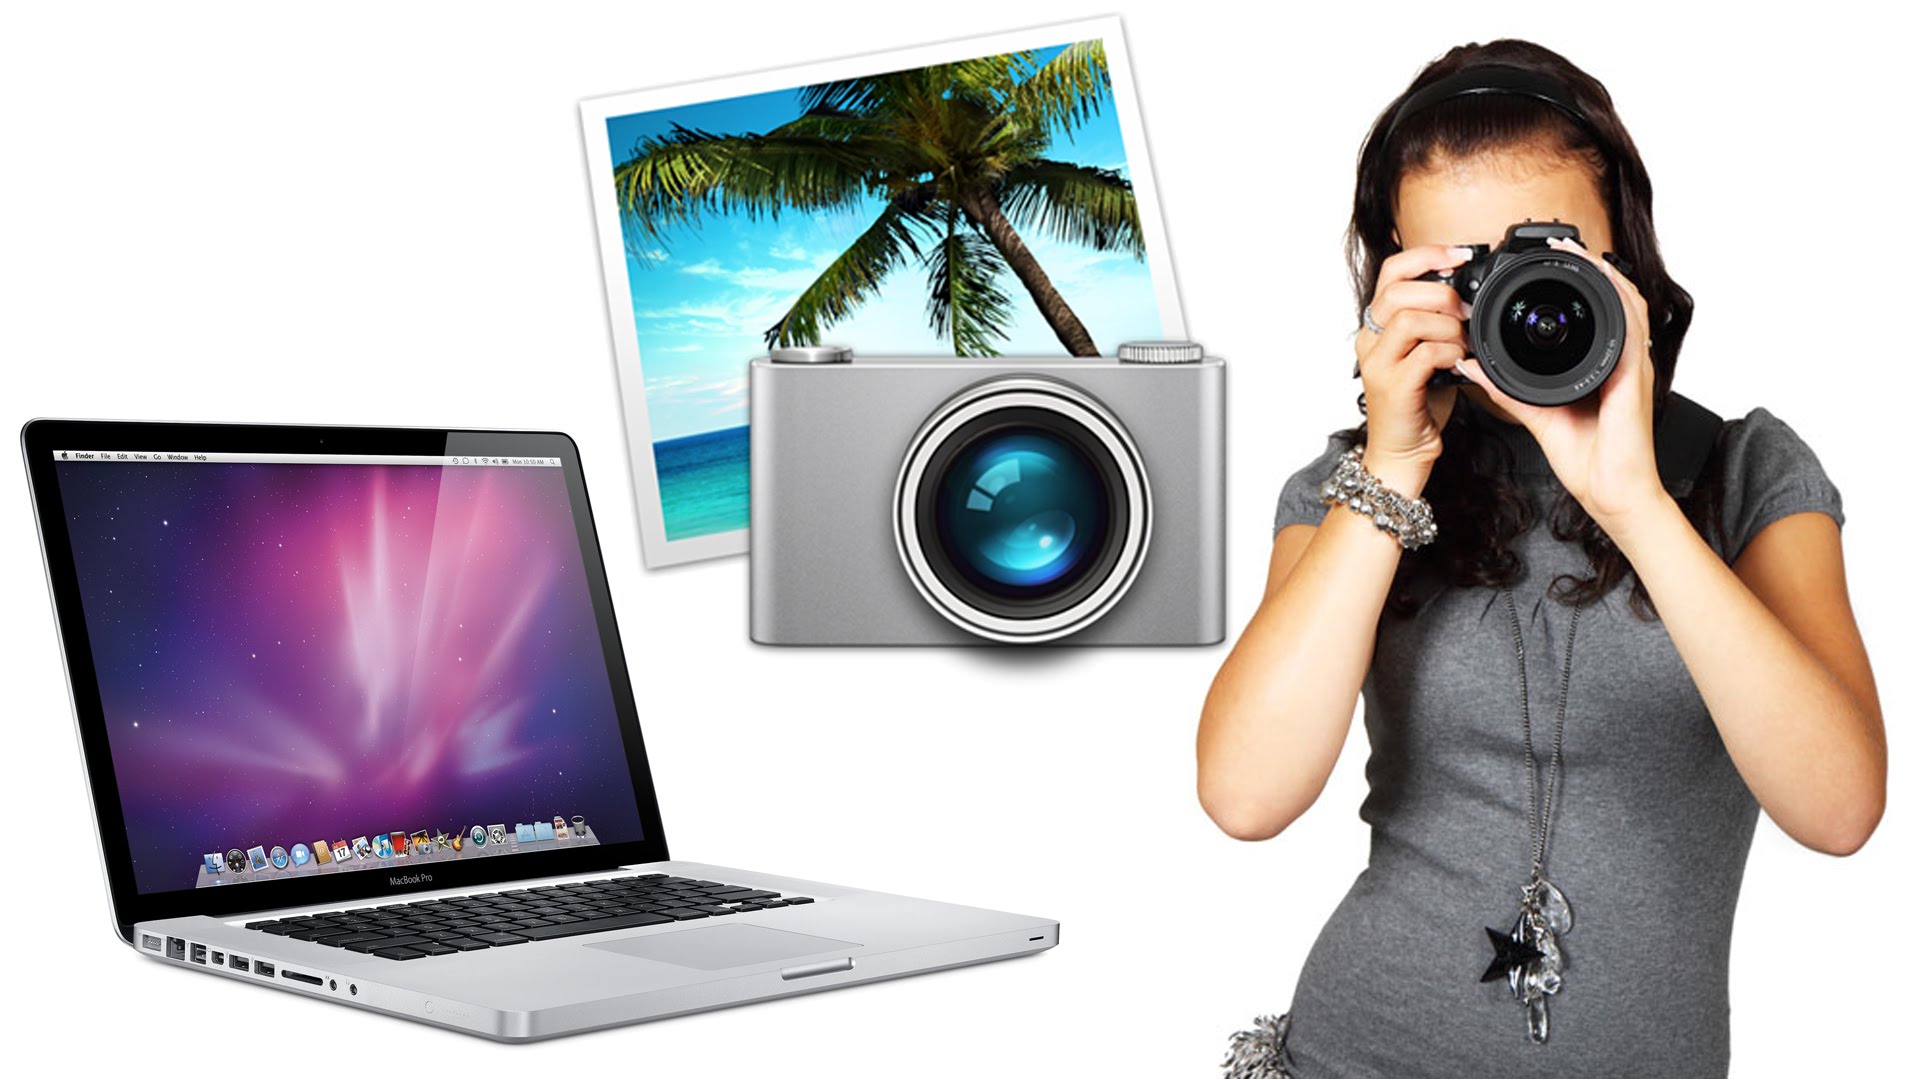 Get Pictures & Videos Off Digital Camera Onto Your Apple Computer | iPhoto Tutorial